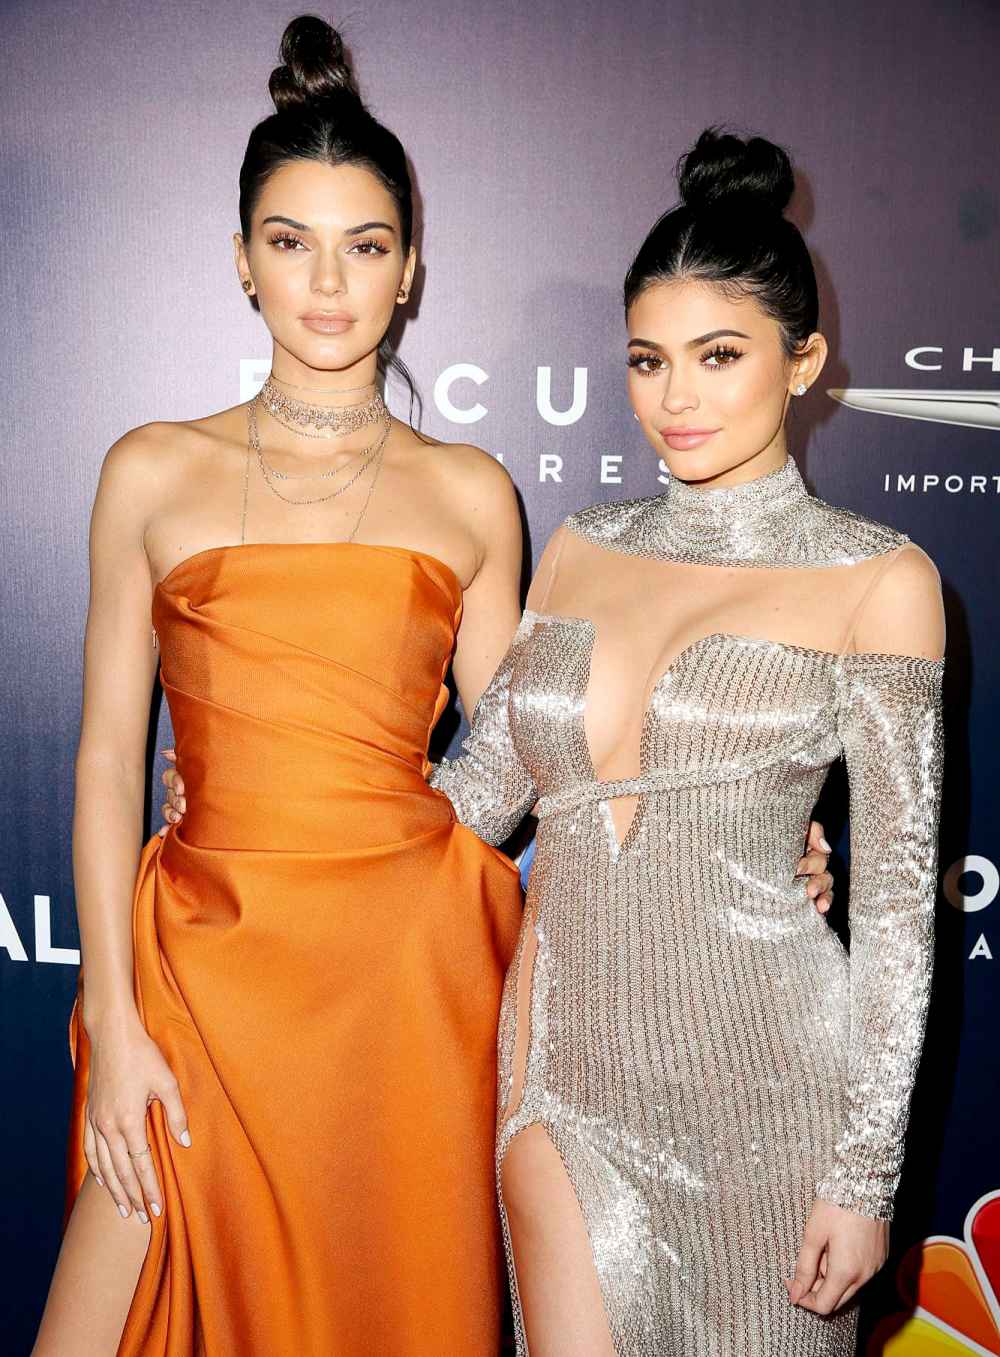 TikTok User Has Convincing Theory That Kendall Kylie Jenner May Be Releasing Tequila